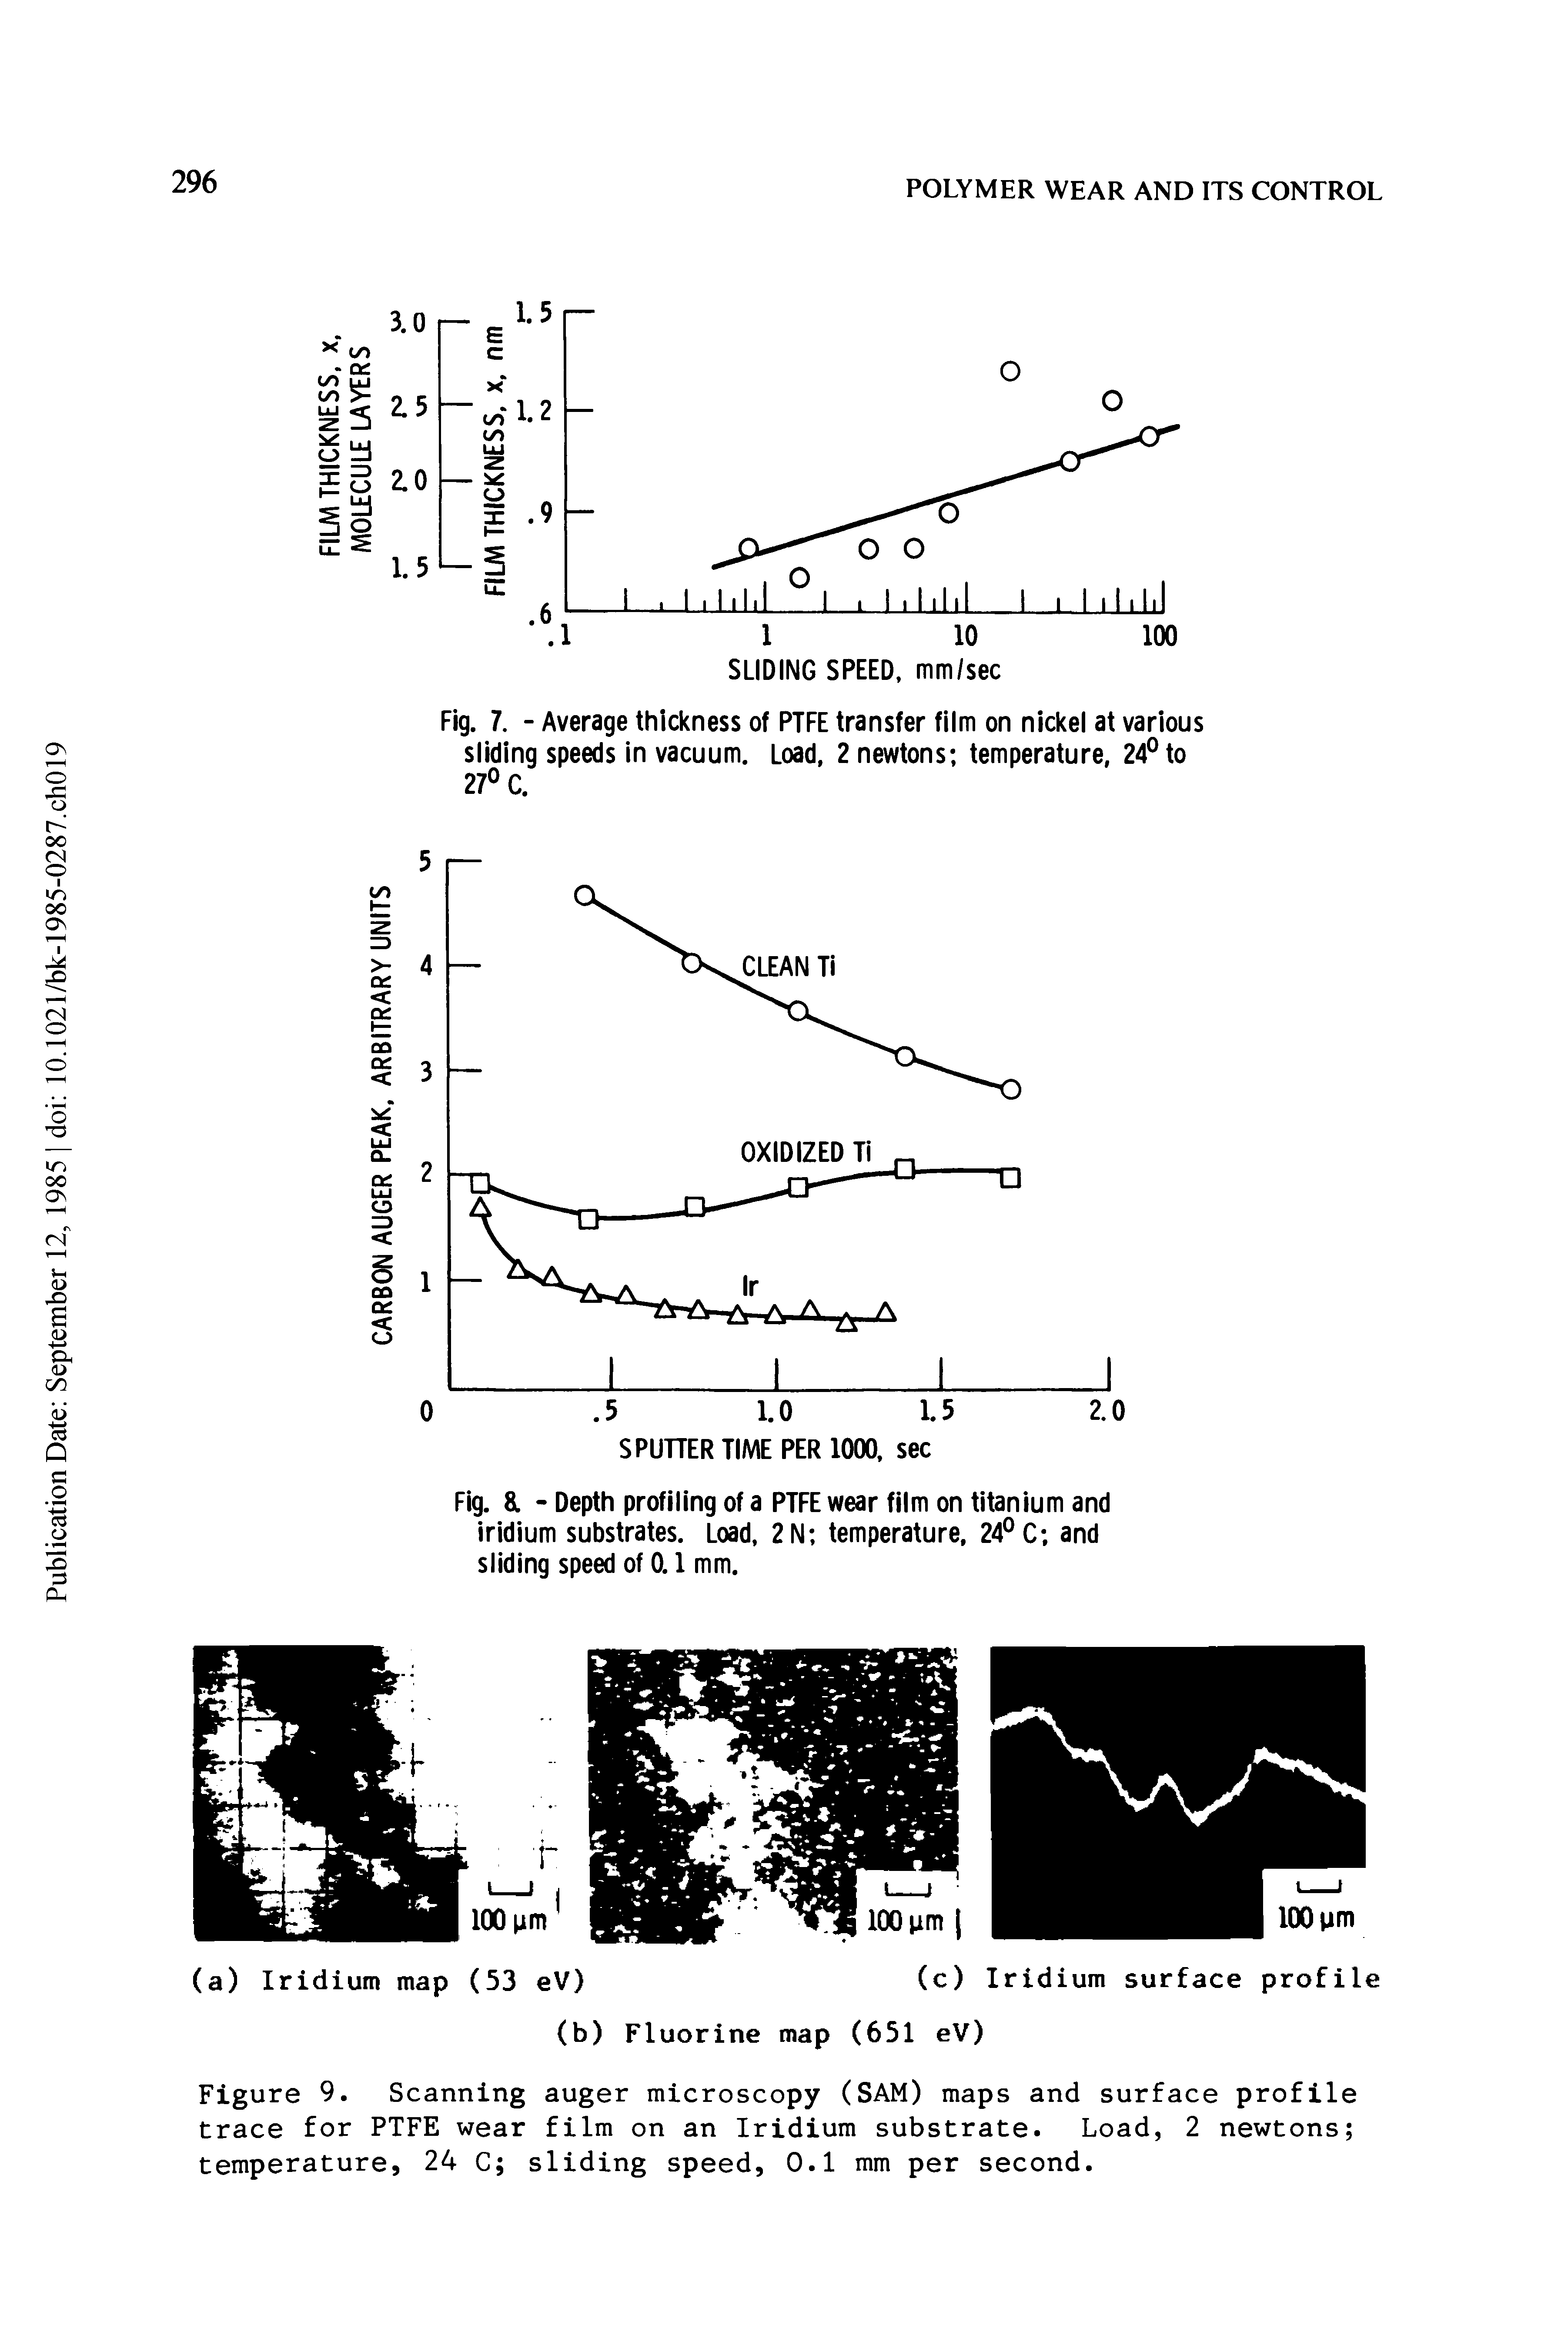 Figure 9. Scanning auger microscopy (SAM) maps and surface profile trace for PTFE wear film on an Iridium substrate. Load, 2 newtons temperature, 24 C sliding speed, 0.1 mm per second.